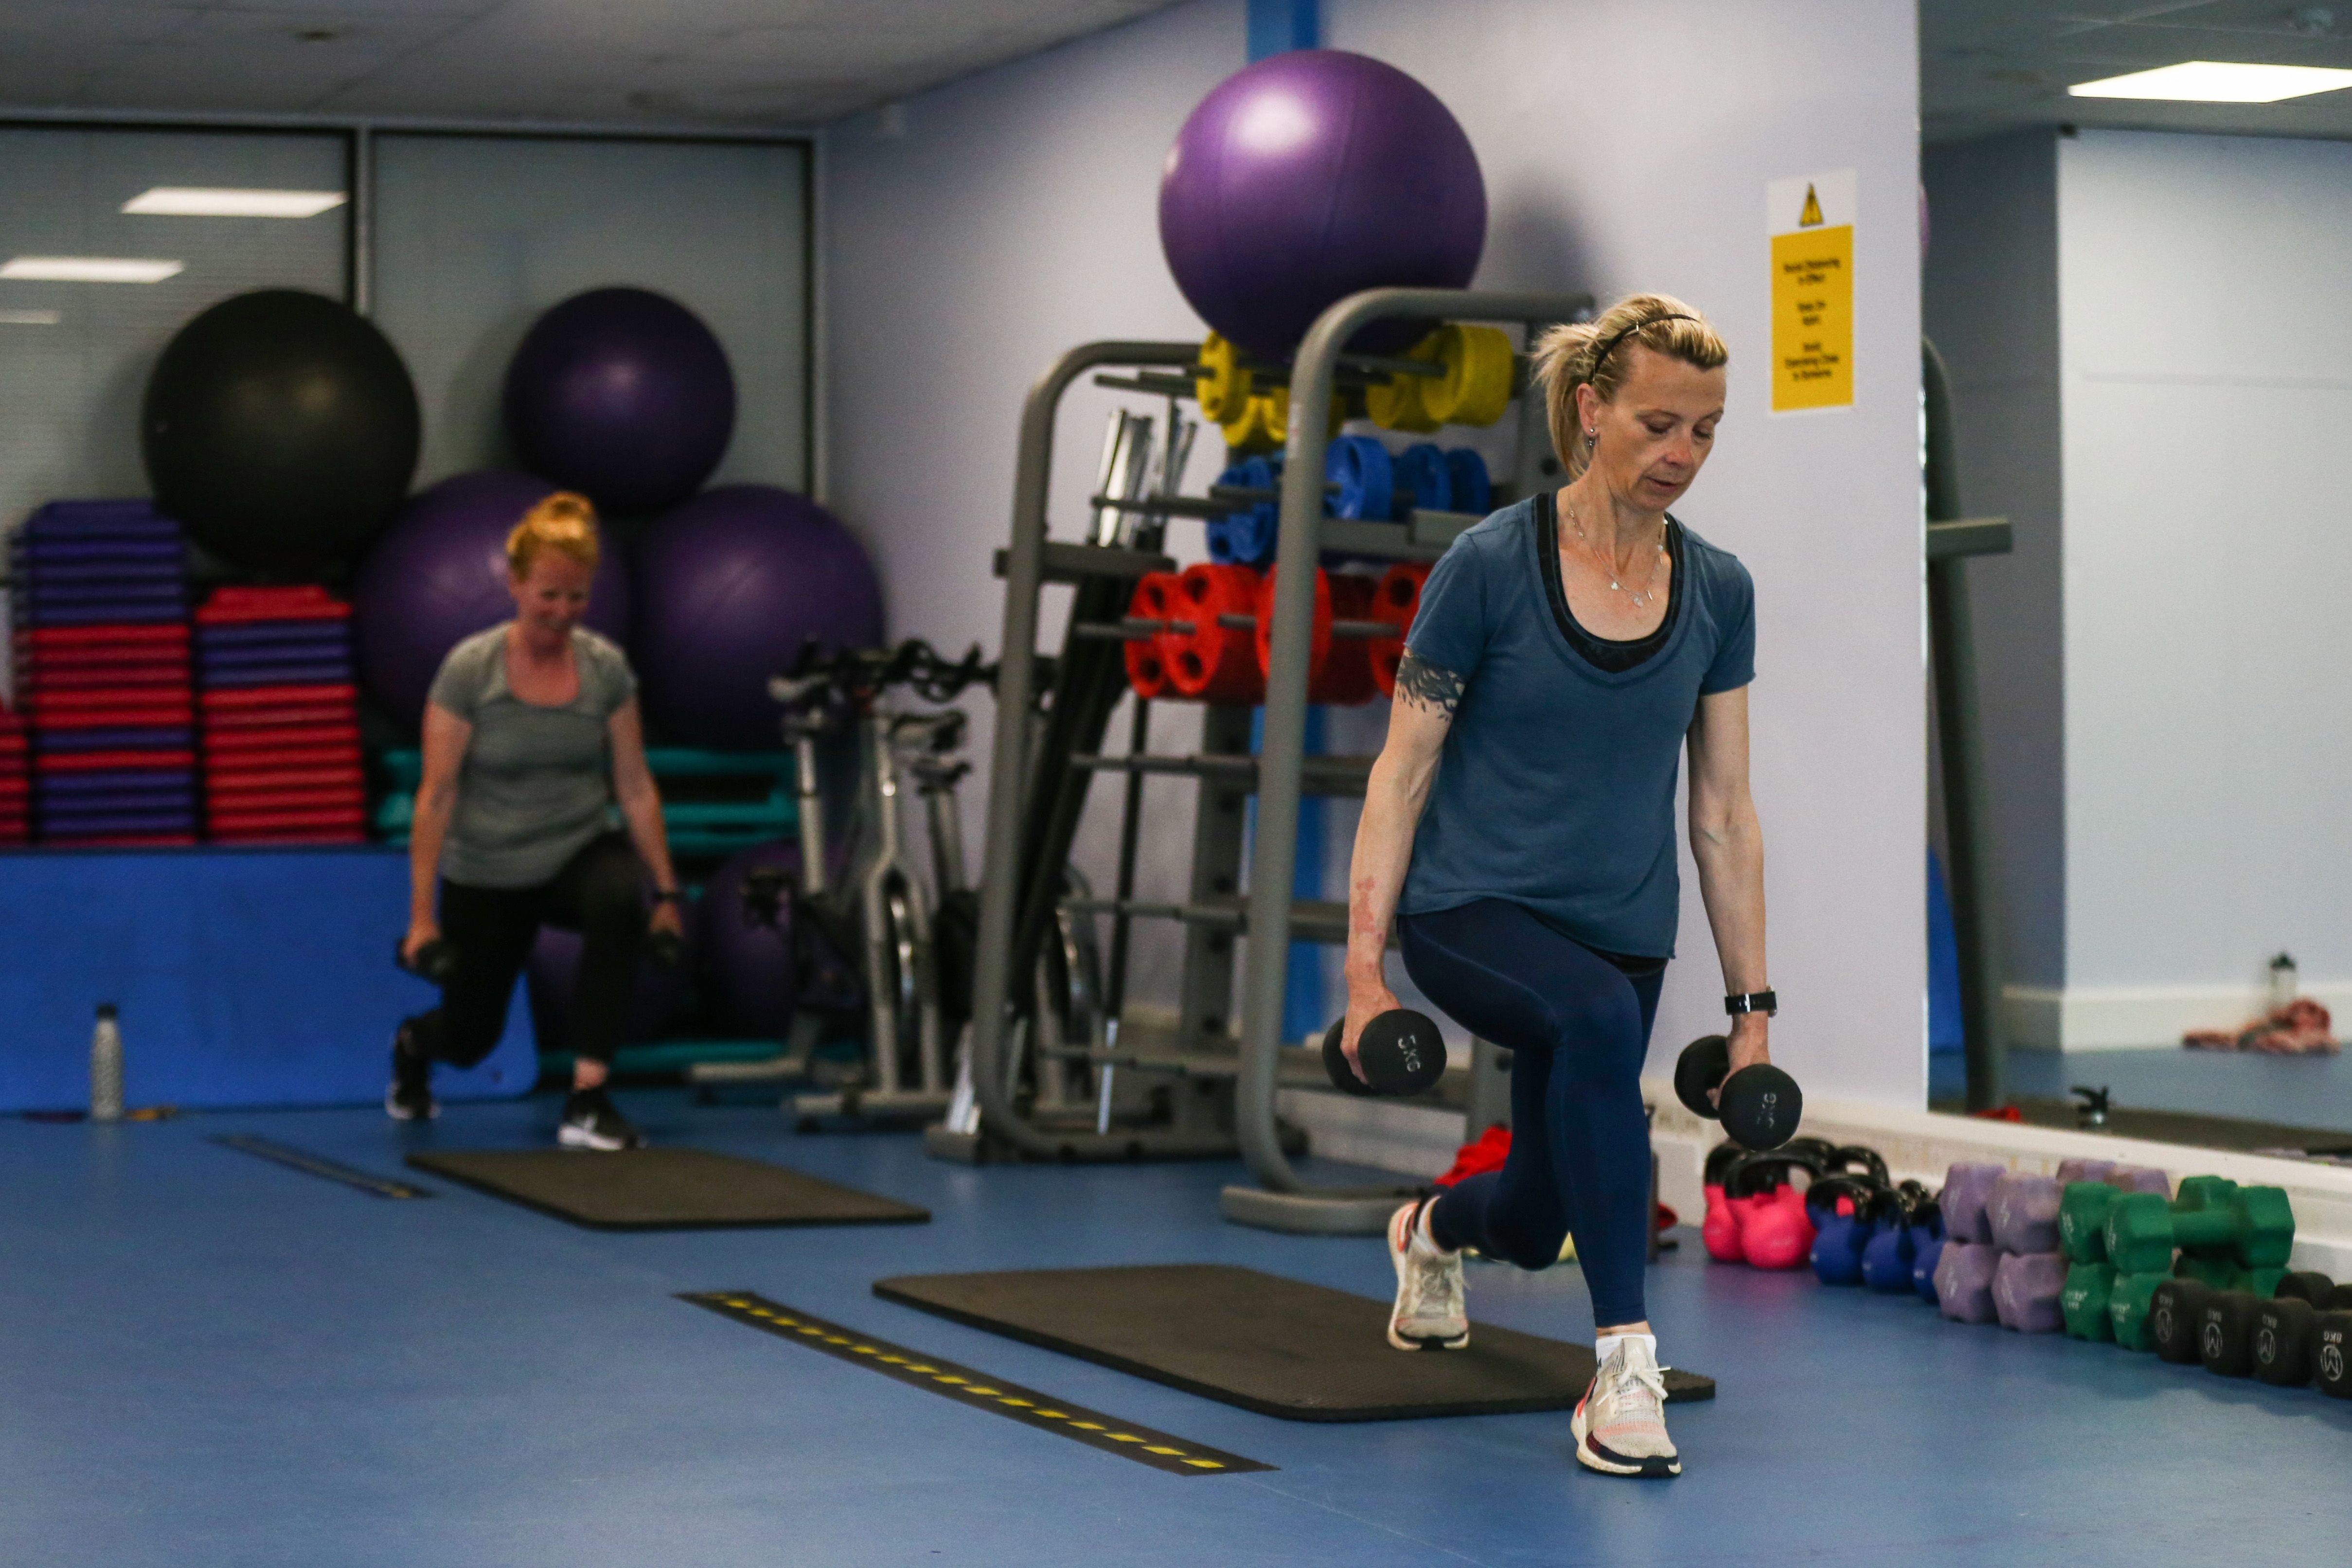 Exercising as an older adult, the safe and enjoyable way - BHF